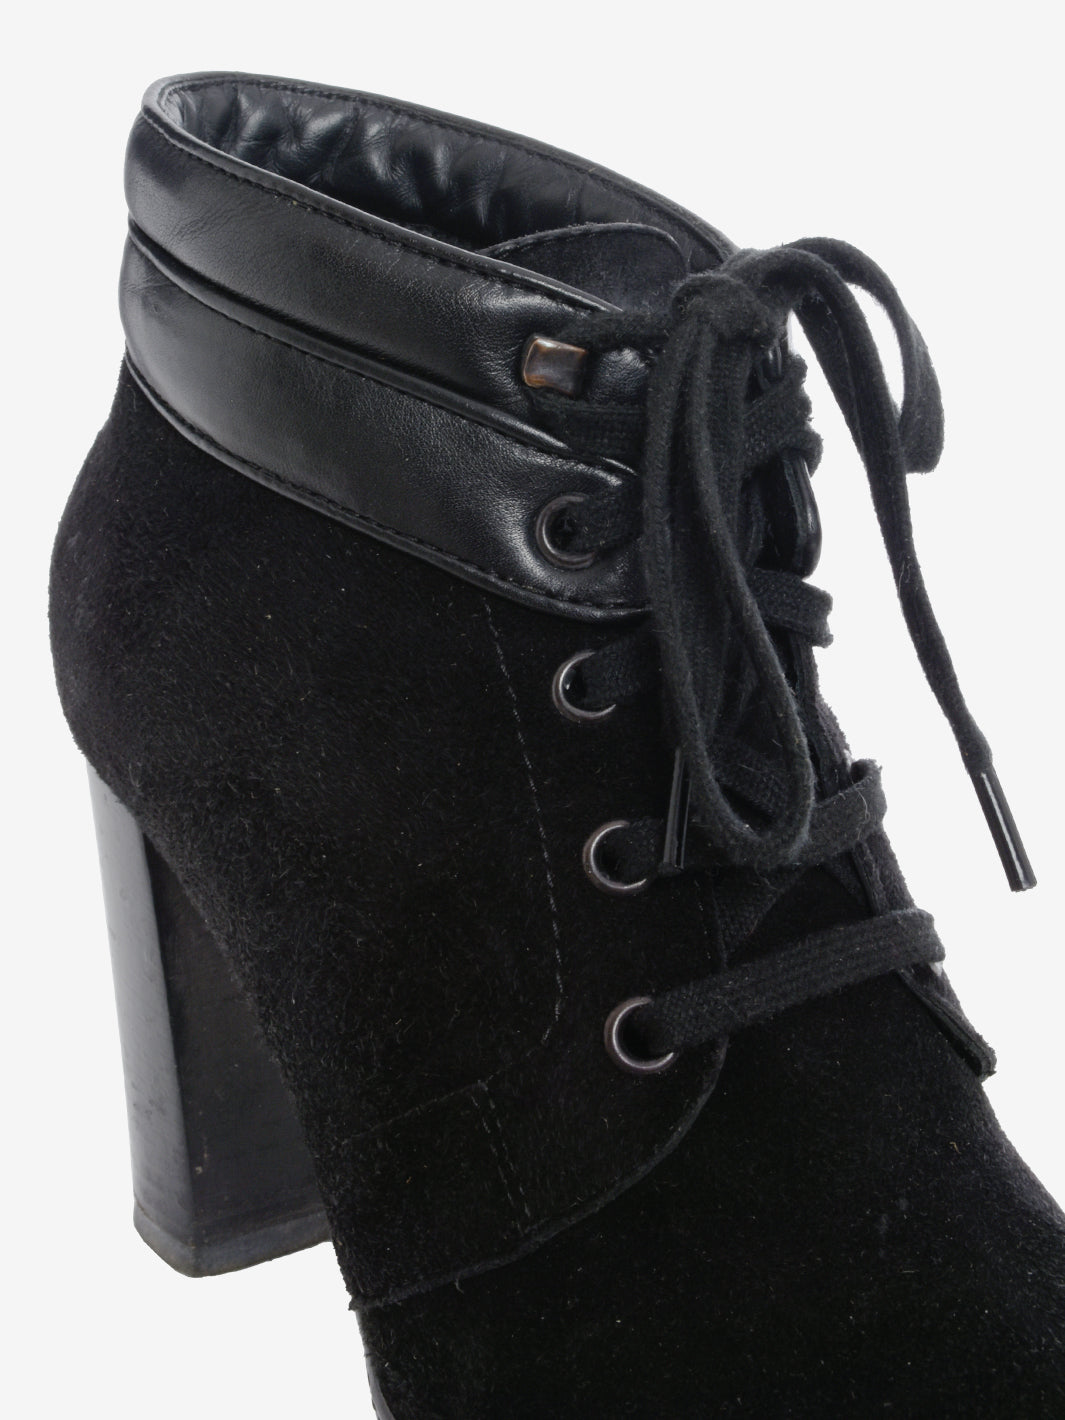 Tods's Black Suade Ankle Boots